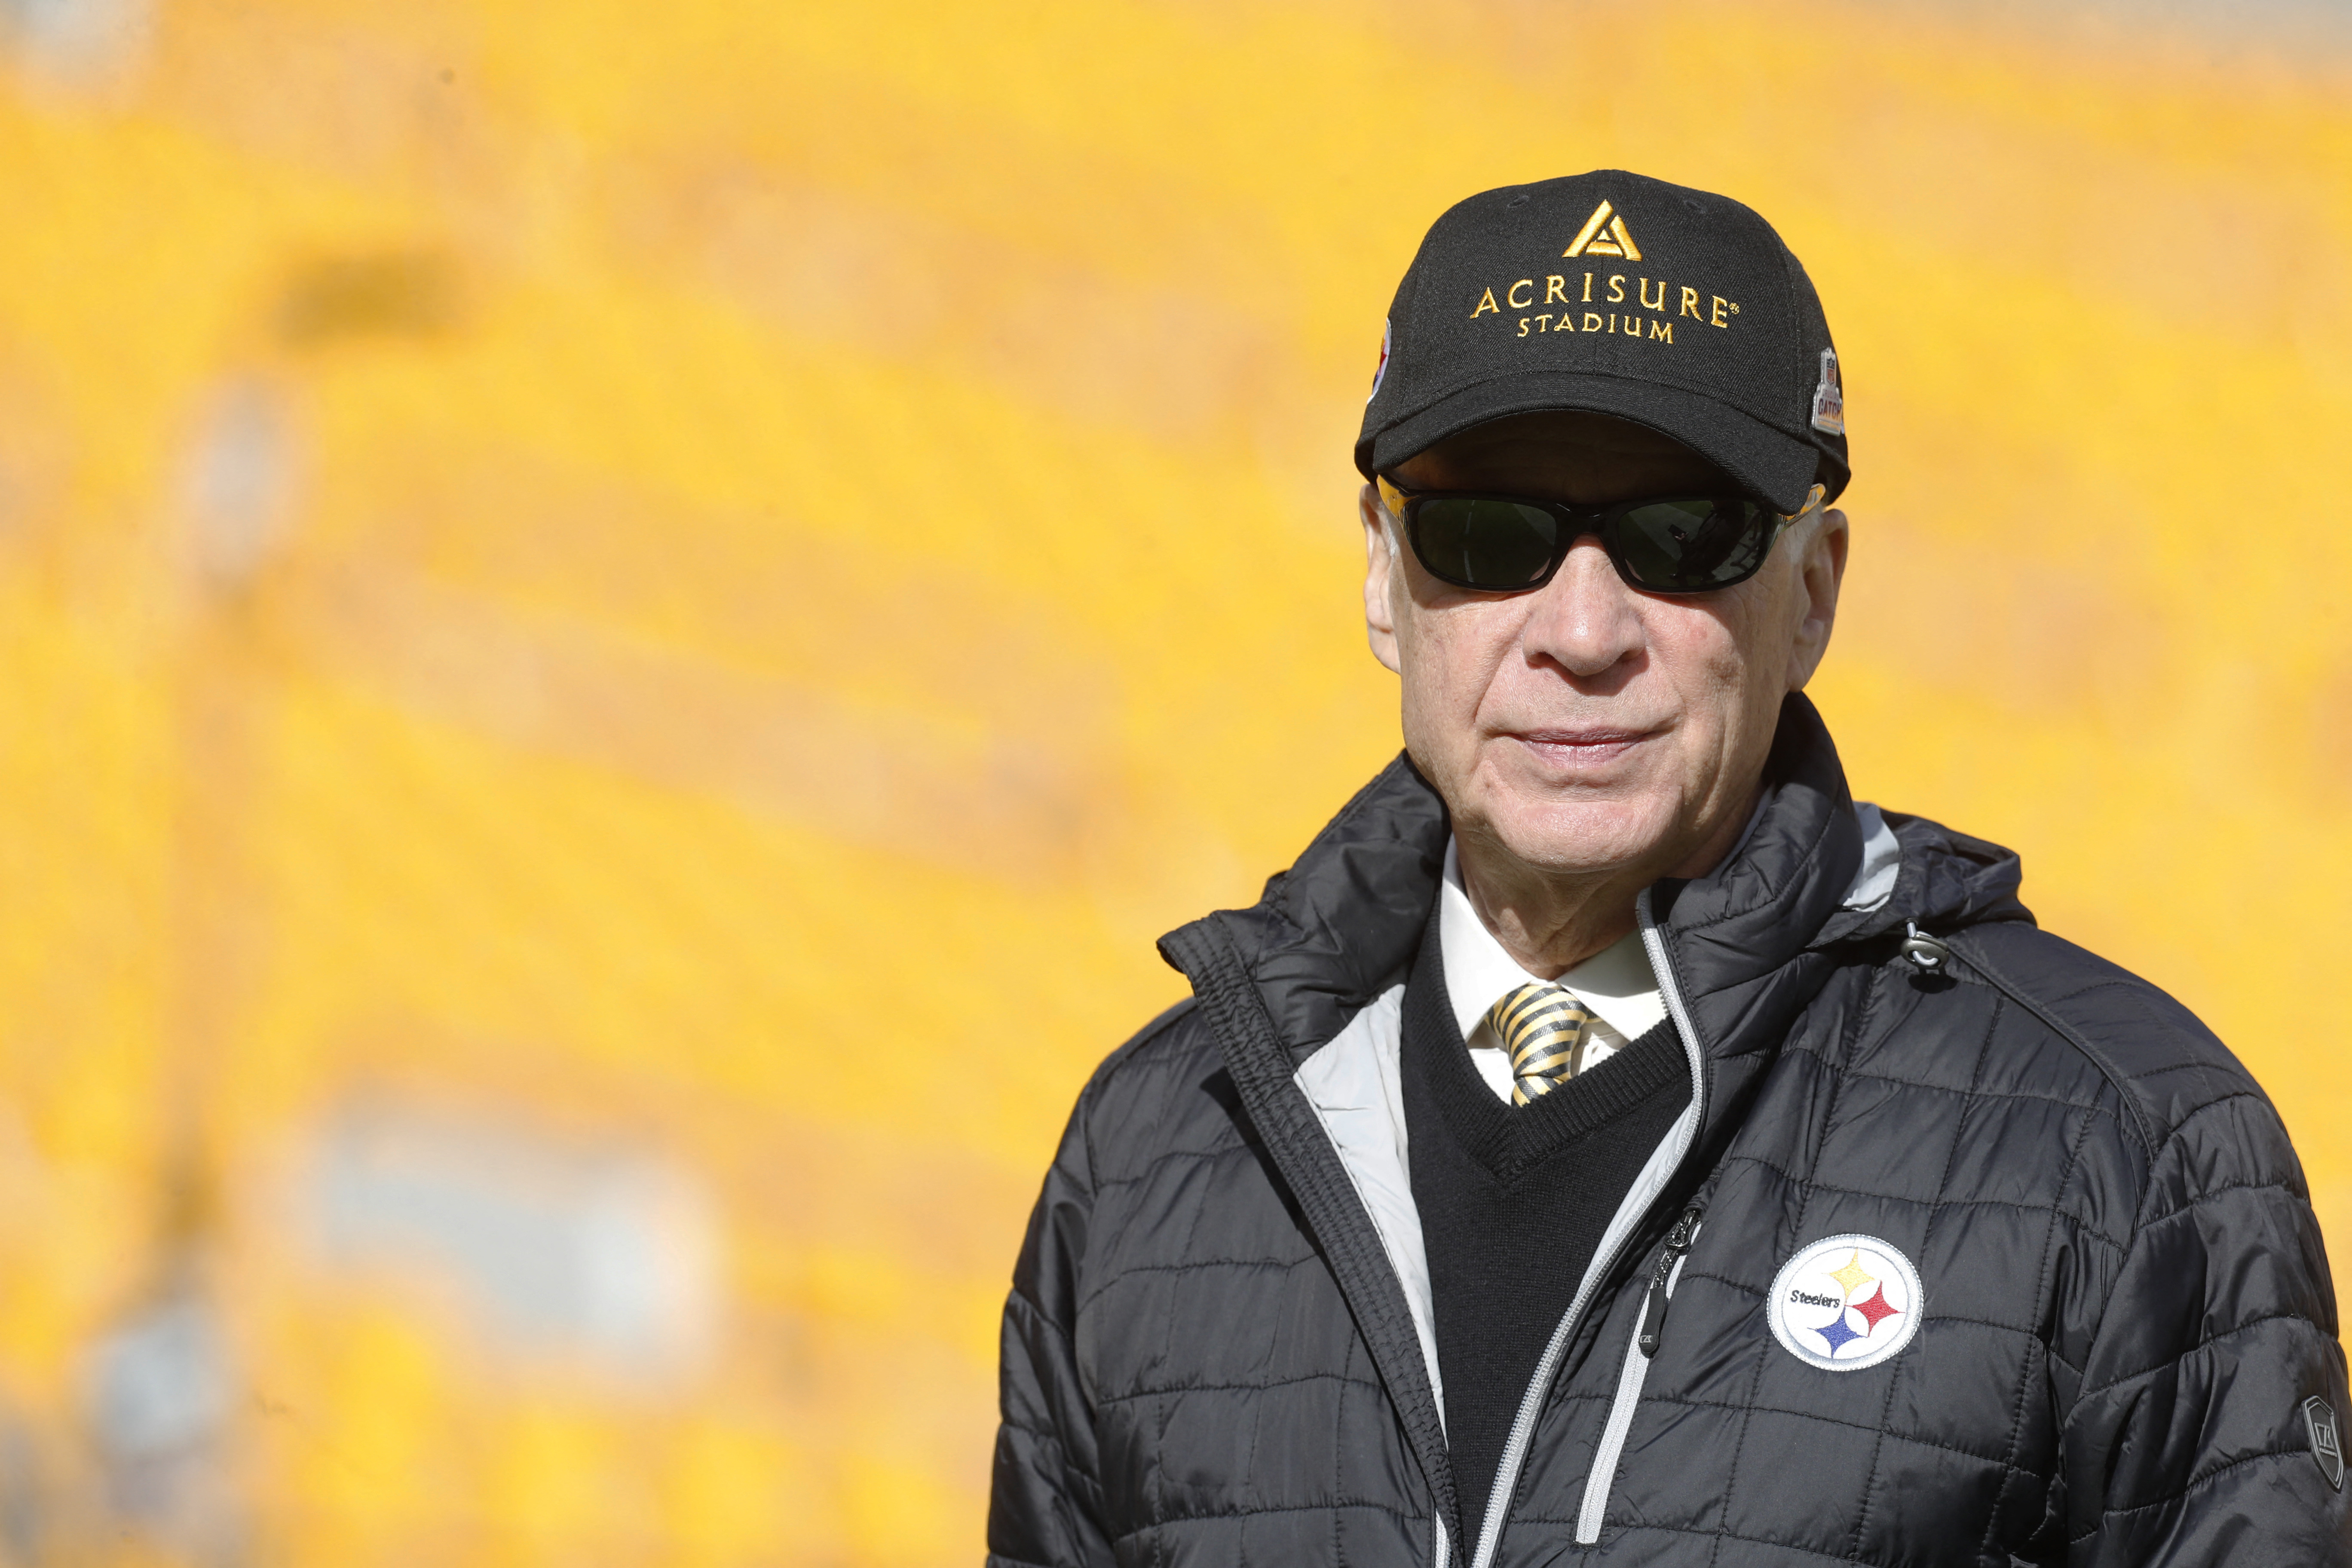 Ravens-Steelers Game Postponed For 3rd Time: Report